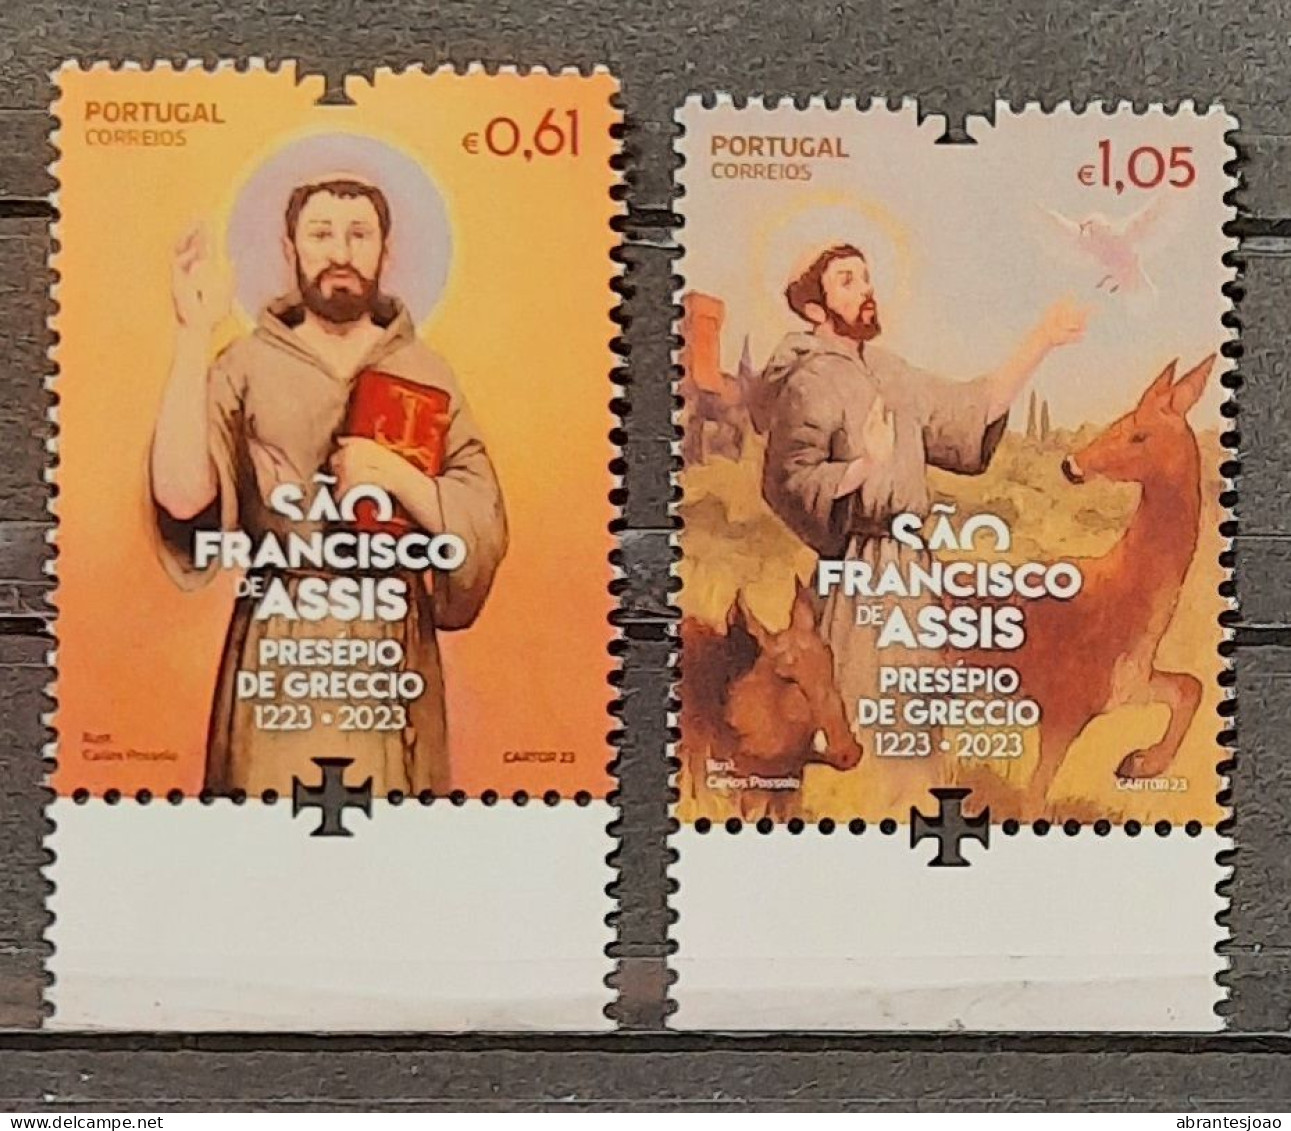 2023 - Portugal - MNH - Saint Francis Of Assis - Presepius Of Greccio - 1223/2023 - 2 Stamps + Block Of 1 Stamp - Ungebraucht